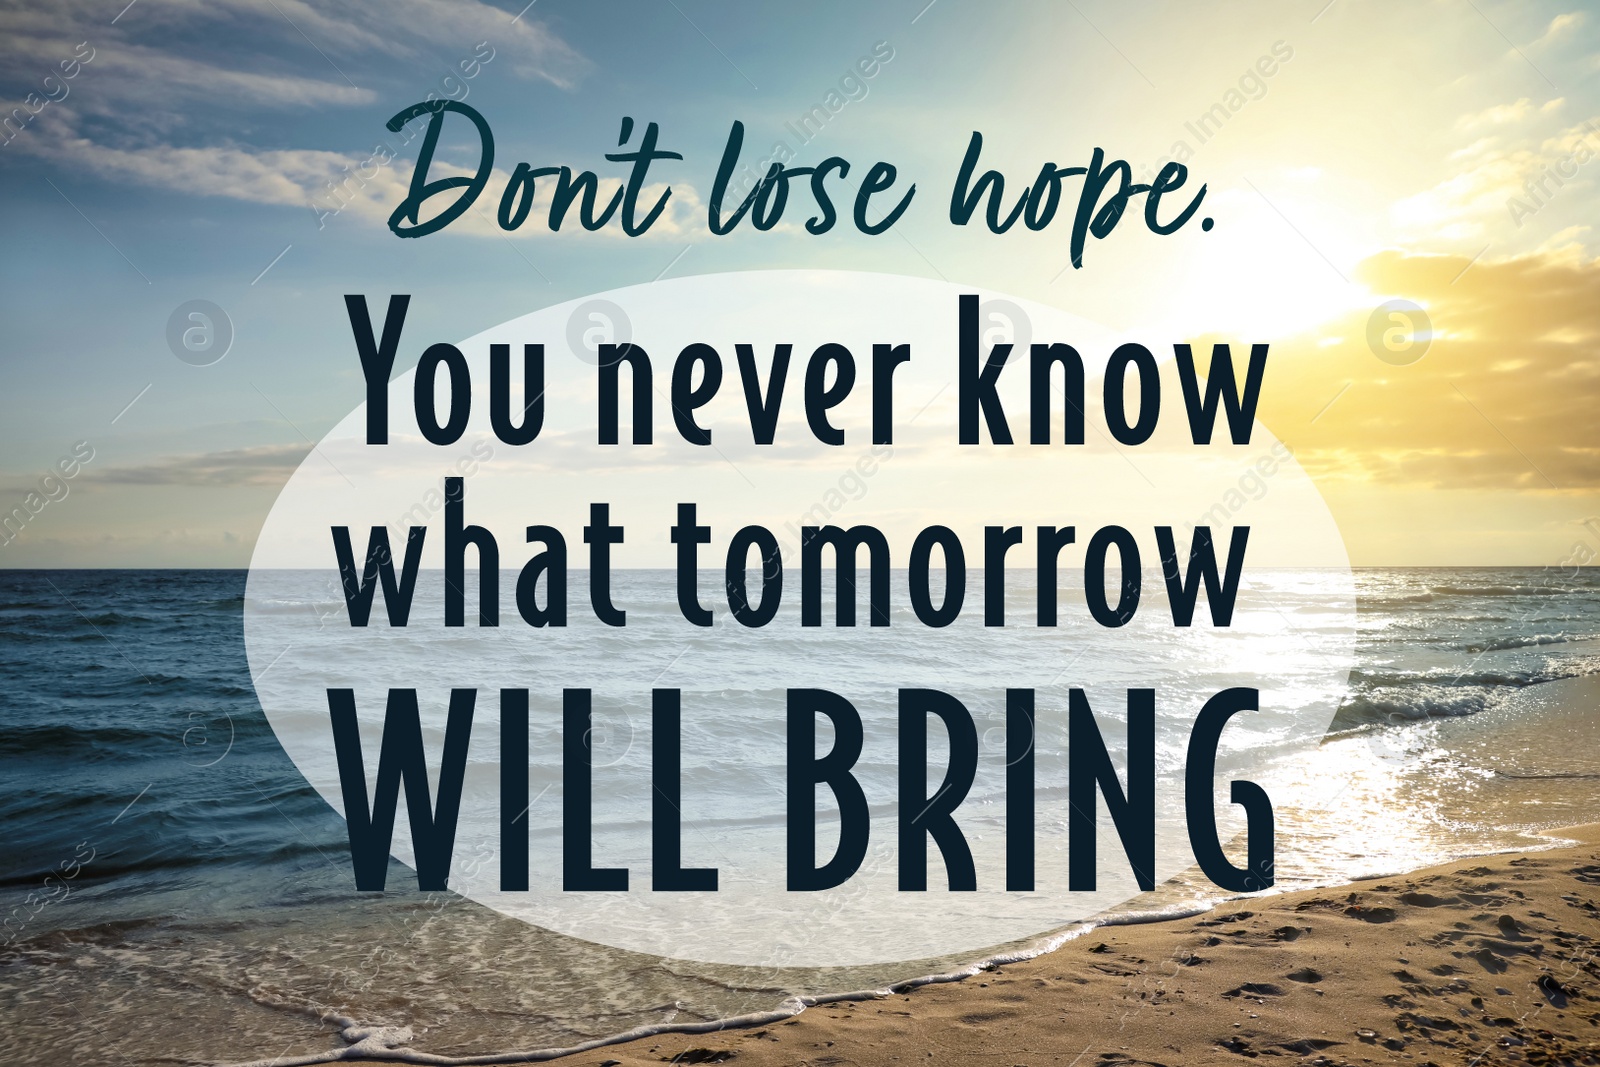 Image of Don't Lose Hope You Never Know What Tomorrow Will Bring. Inspirational quote saying about patience, belief in yourself and next day. Text against beautiful sandy beach and sea in morning